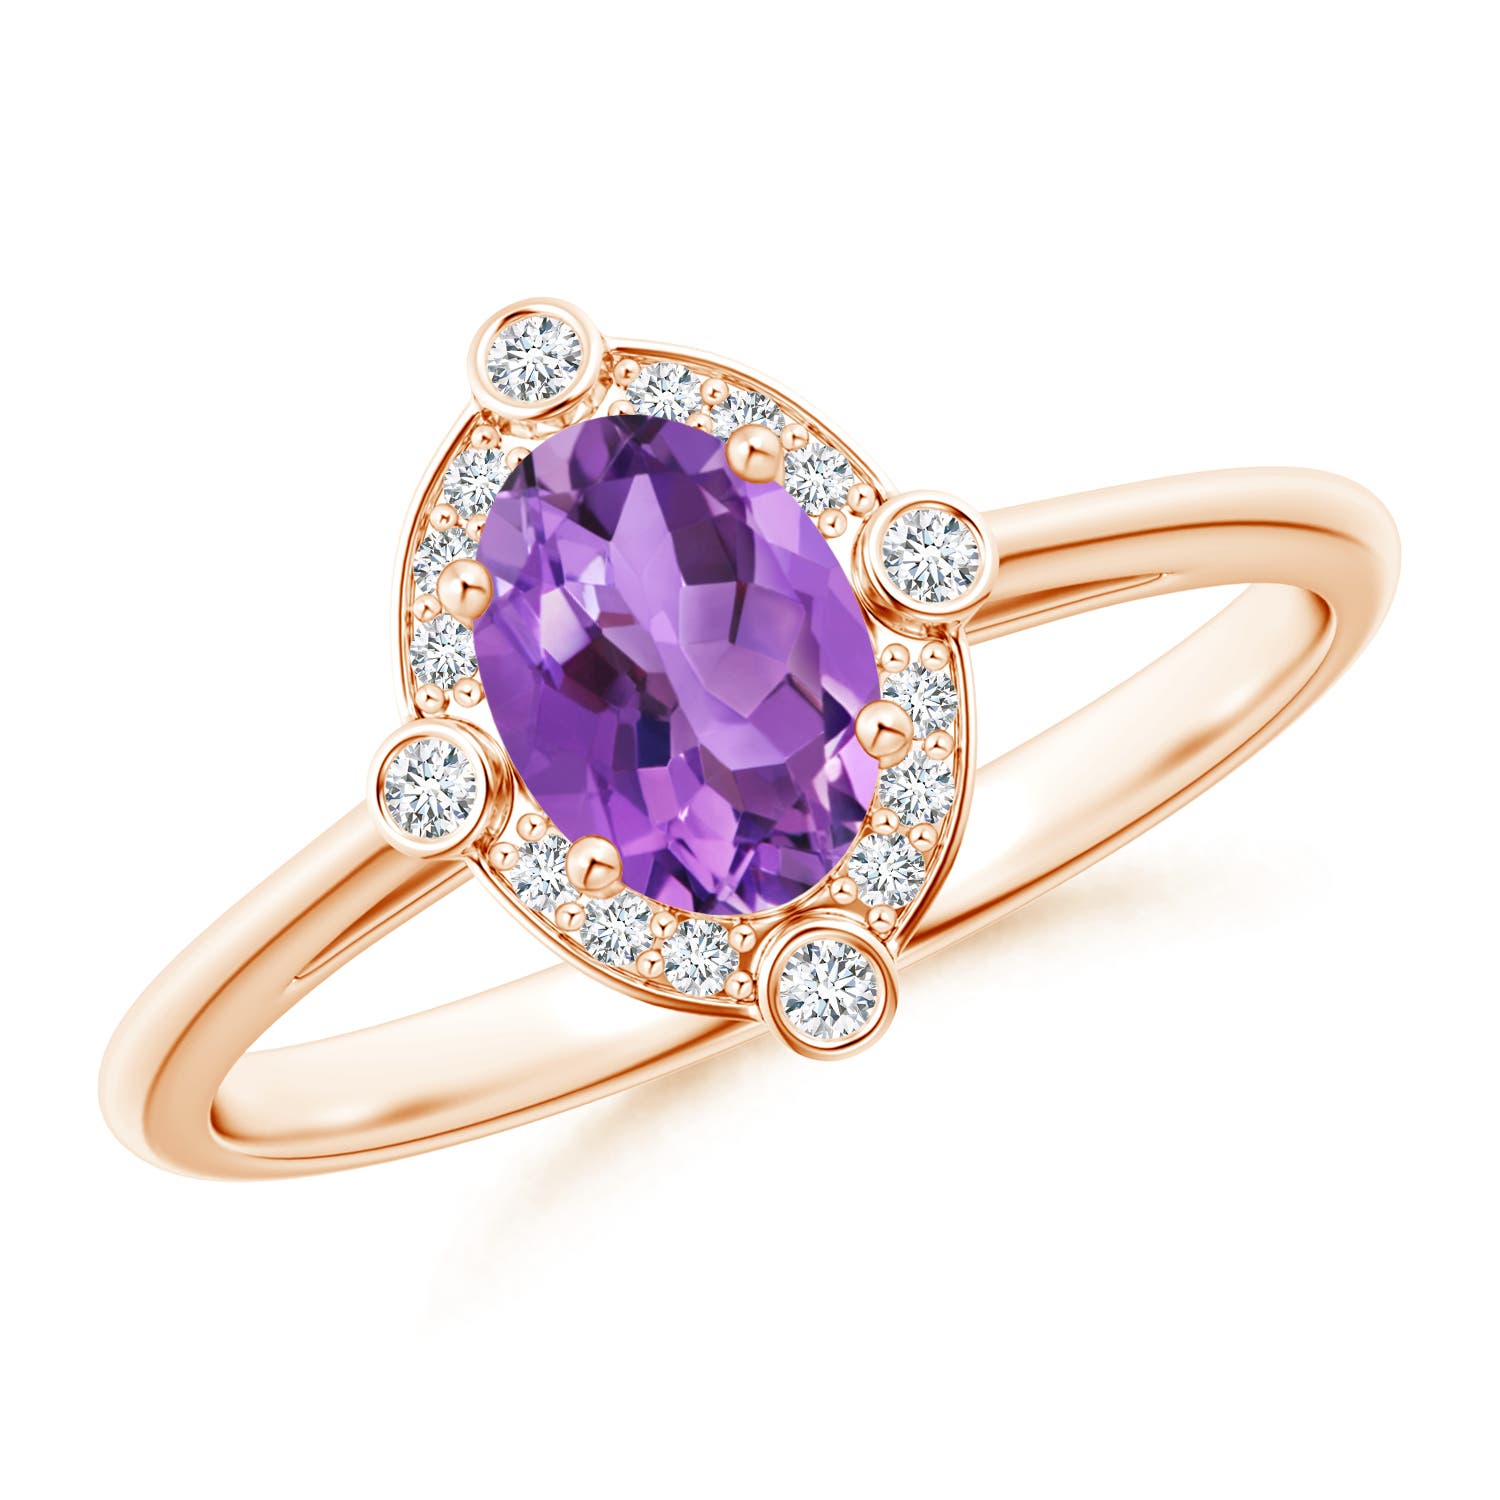 AA - Amethyst / 0.82 CT / 14 KT Rose Gold